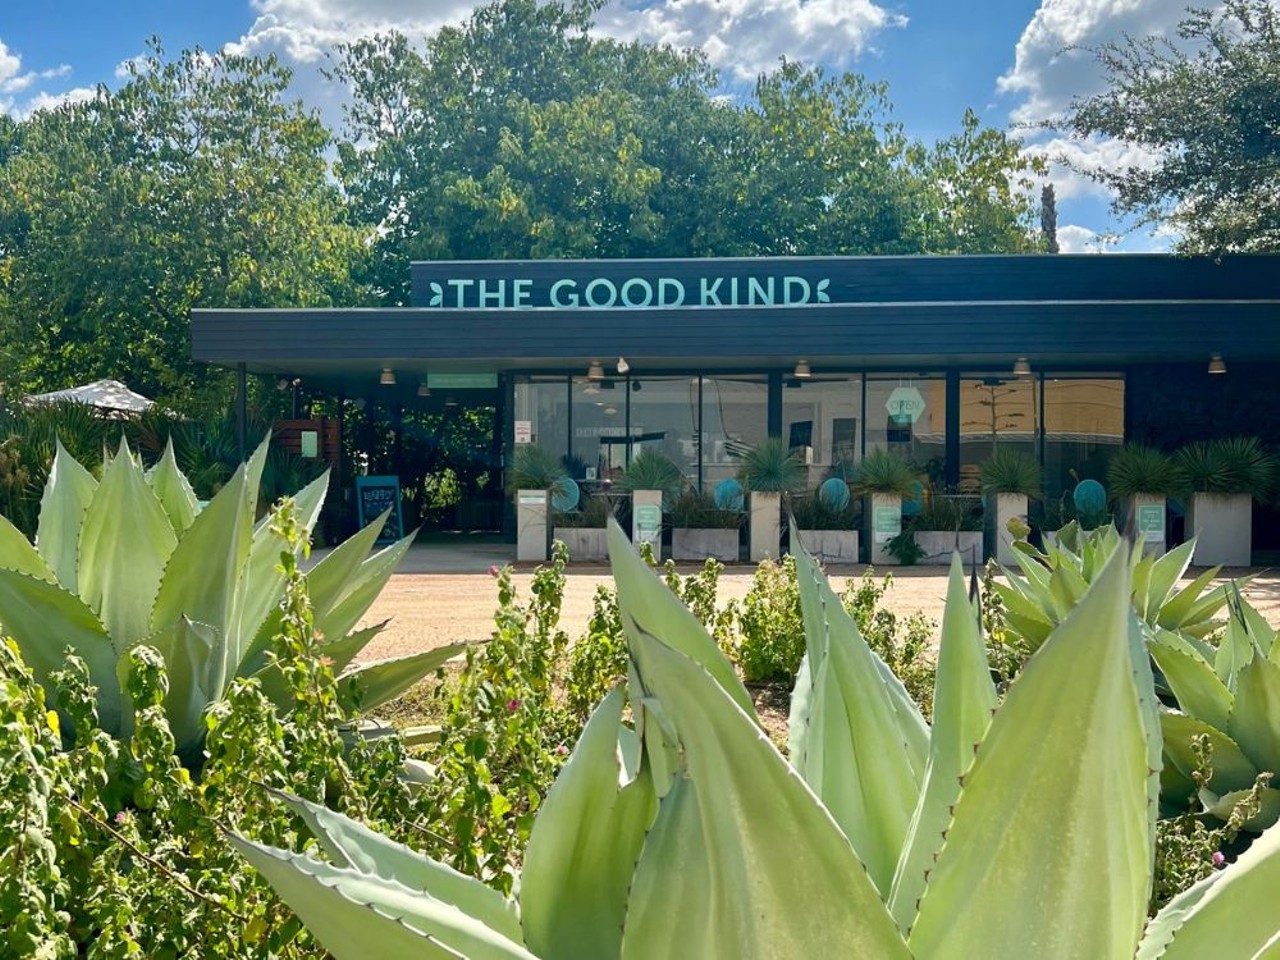 The Good Kind Southtown
1127 S. St. Mary's St., (210) 801-5892, eatgoodkind.com
The Good Kind’s picturesque garden is open for all to peruse while the sun beams down. The restaurant also offers kid-friendly options on its menu.